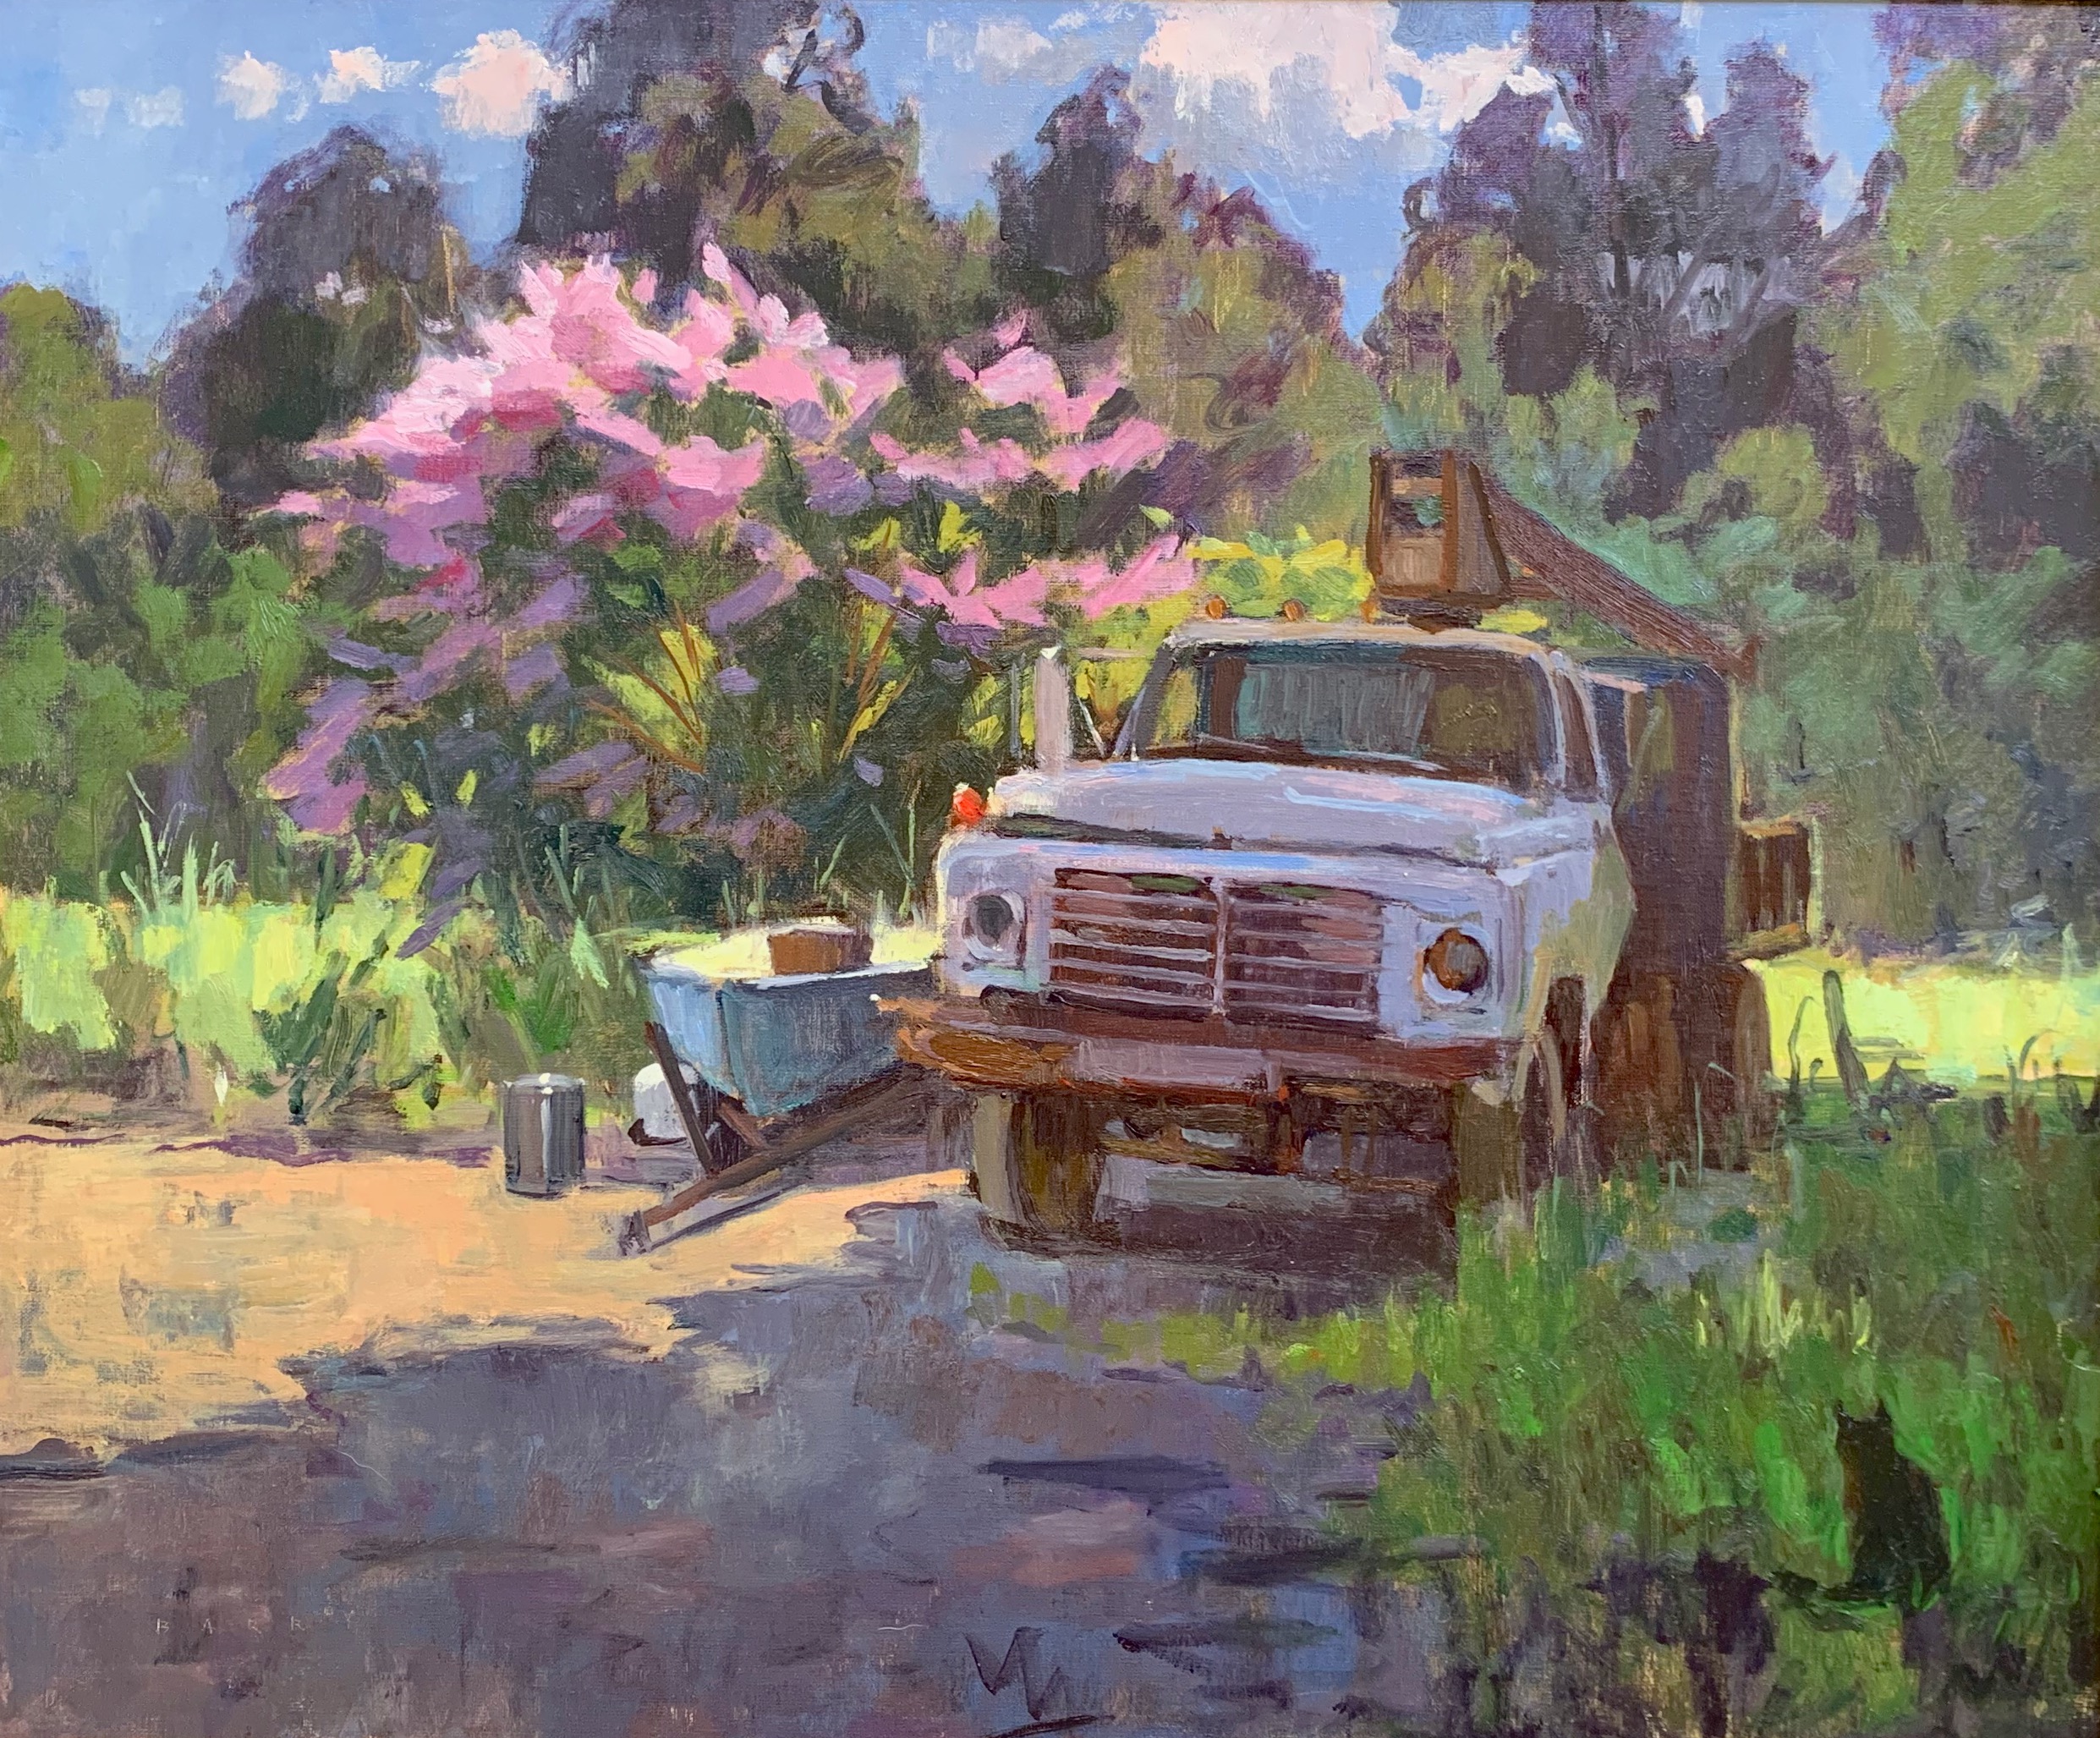 Alison Barry, "A Shady Spot," 2021, oil, 20 x 24 in., Available from the artist, Plein air